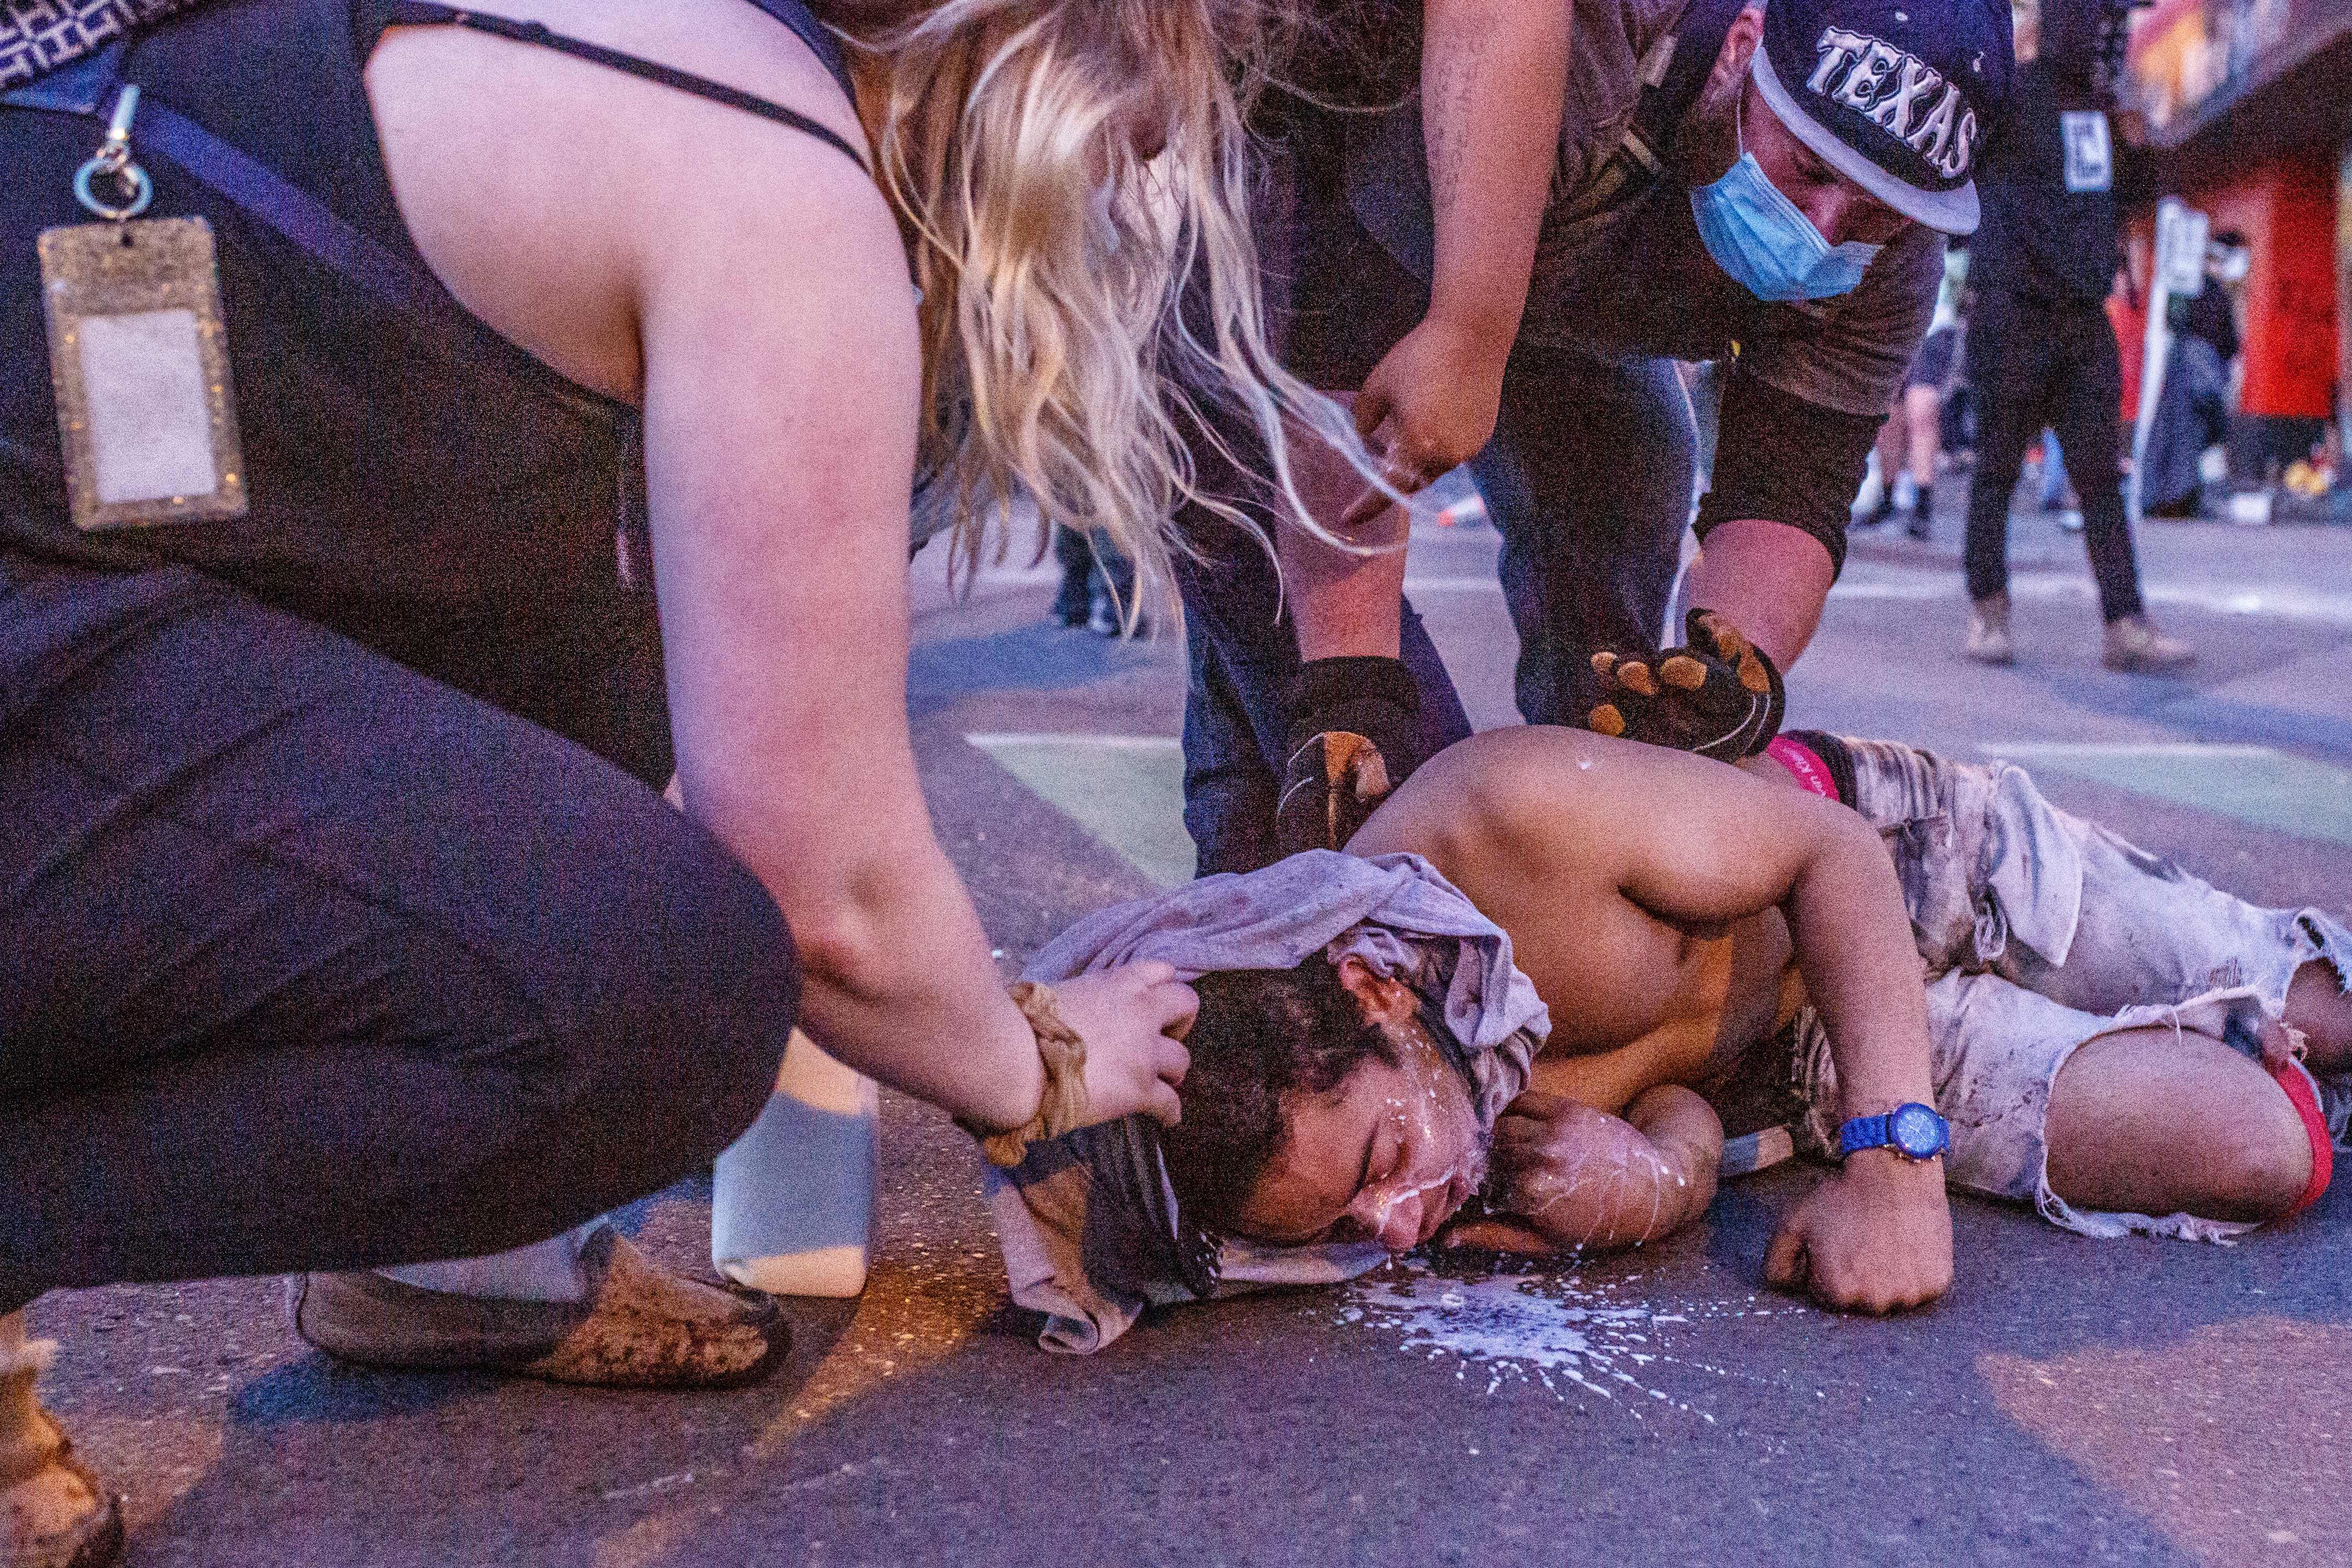 People assist an injured man during a protest outside the Third Police Precinct on May 28, 2020 in Minneapolis, Minnesota, over the death of George Floyd, an unarmed black man, who died after a police officer kneeled on his neck for several minutes. - Authorities in Minneapolis and its sister city St. Paul got reinforcements from the National Guard on May 28 as they girded for fresh protests and violence over the shocking police killing of a handcuffed black man. Three days after a policeman was filmed holding his knee to George Floyd's neck for more than five minutes until he went limp, outrage continued to spread over the latest example of police mistreatment of African Americans. (Photo by KEREM YUCEL/AFP via Getty Images)